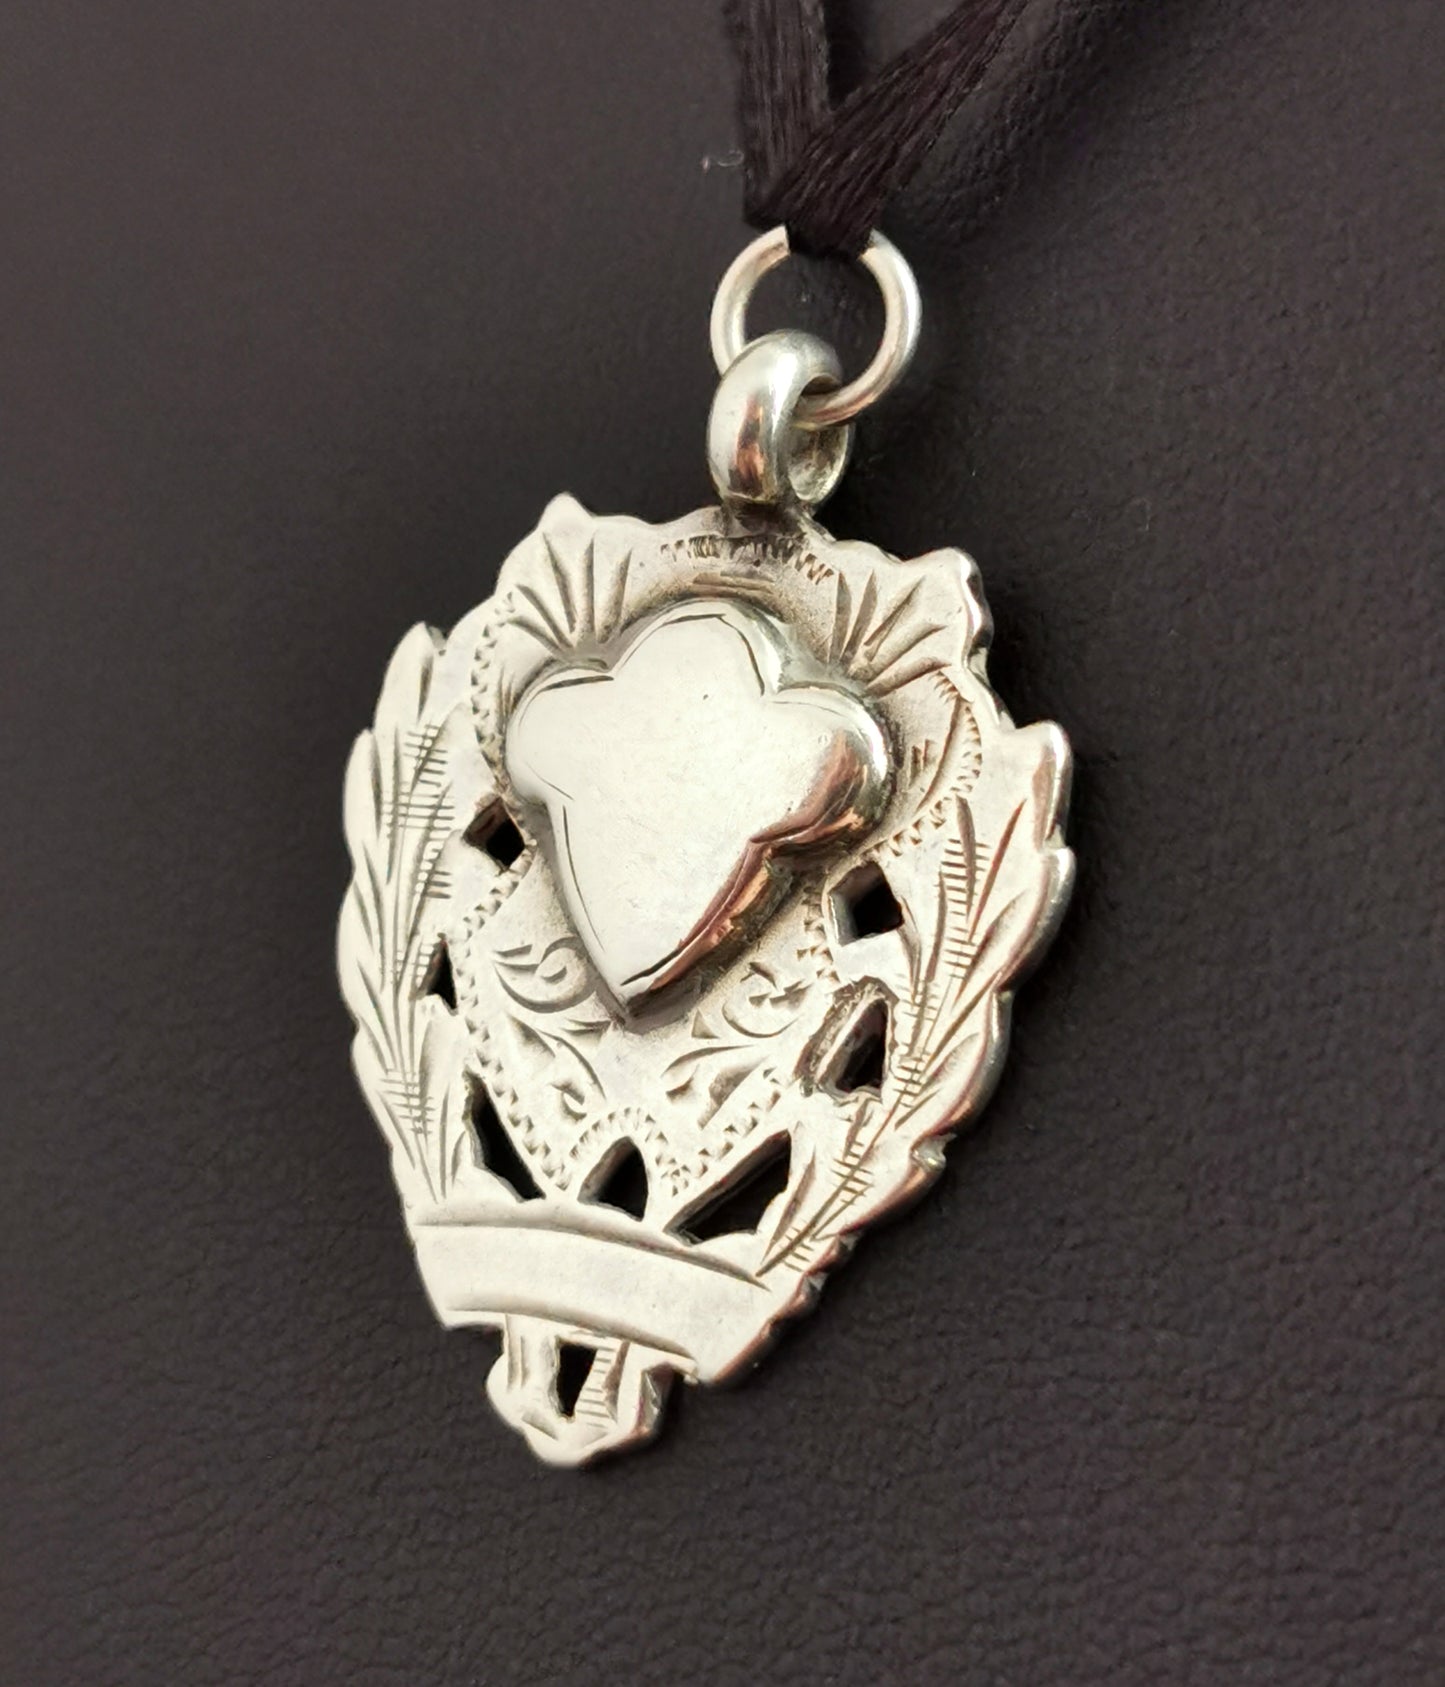 Antique silver watch fob, pendant, 1910s